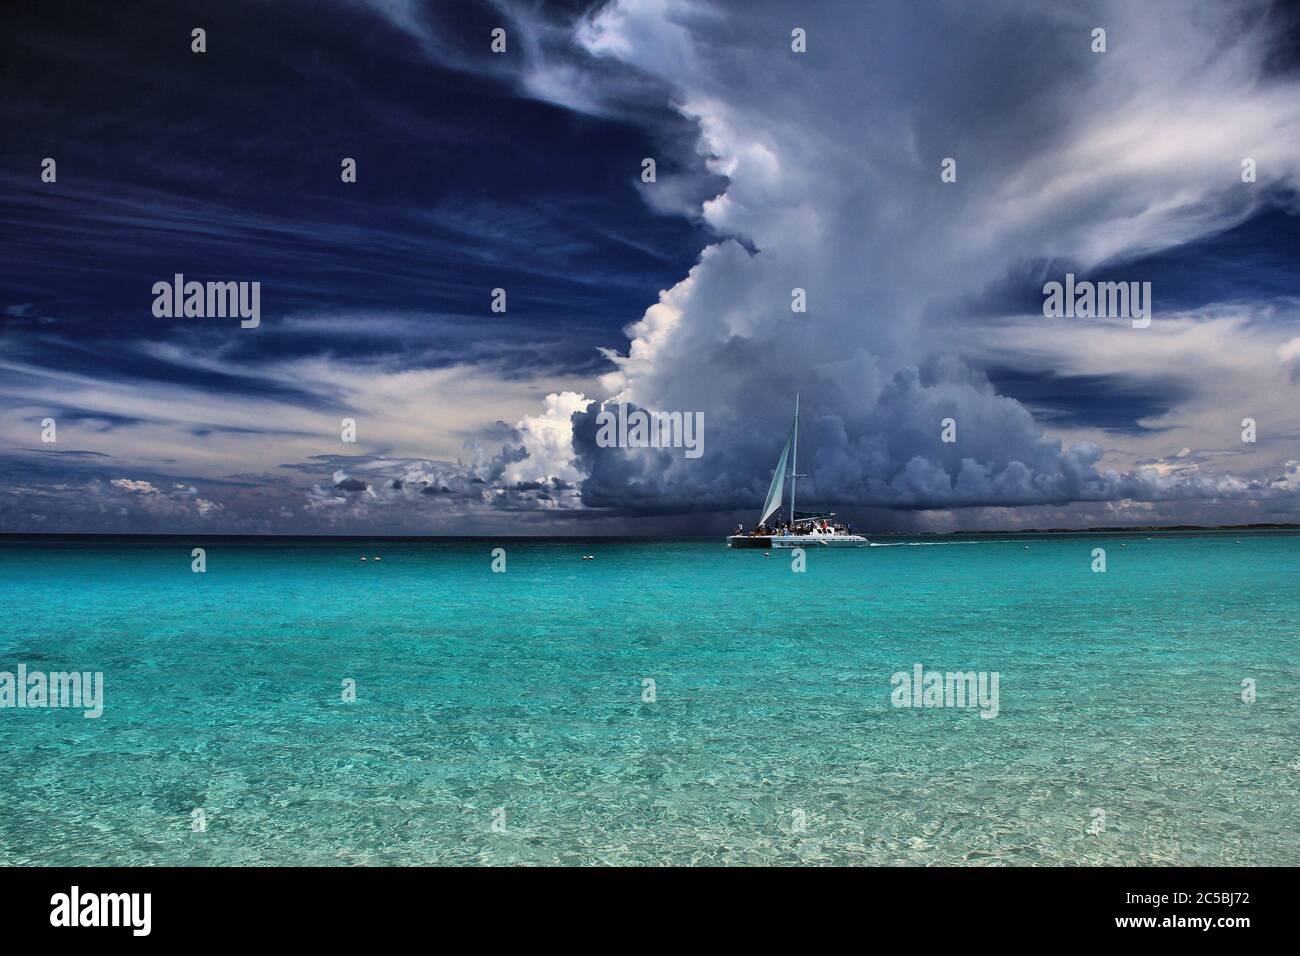 Dramatic Beach Scene With Deep Blue Skies White Clouds And Clear Blue Seas In The Caribbean